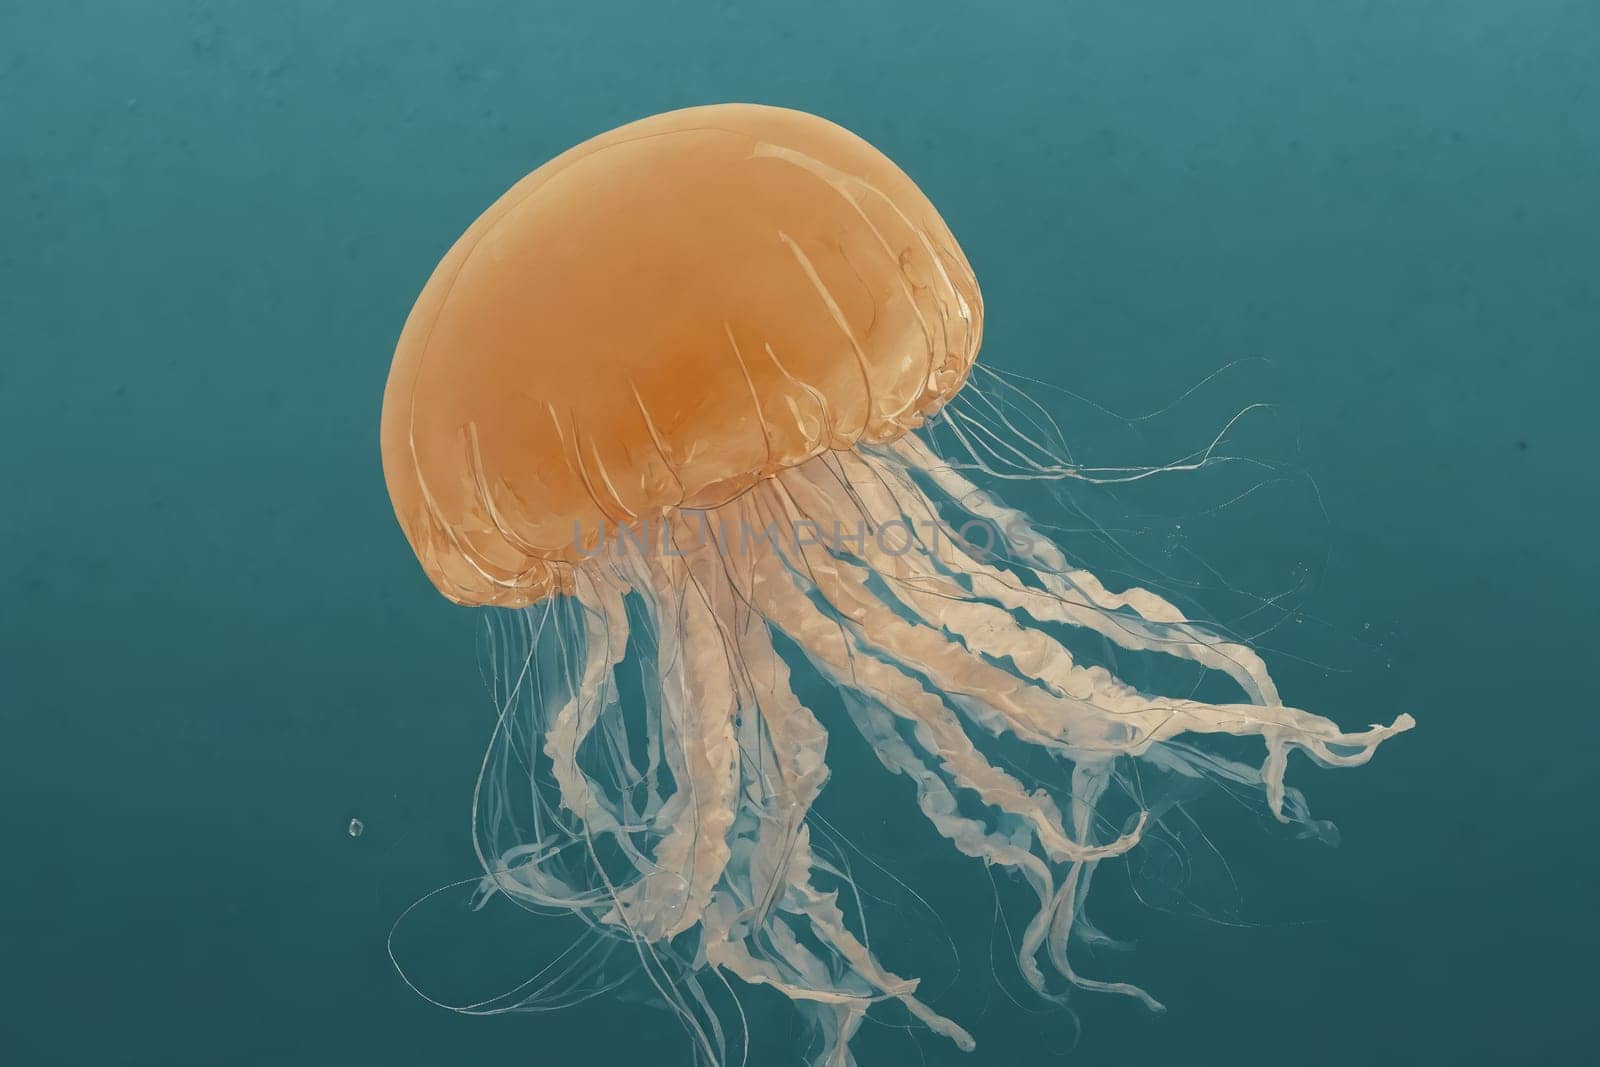 Witness the underwater ballet of a jellyfish, a creature of mesmerizing beauty and poise in the aquatic world.